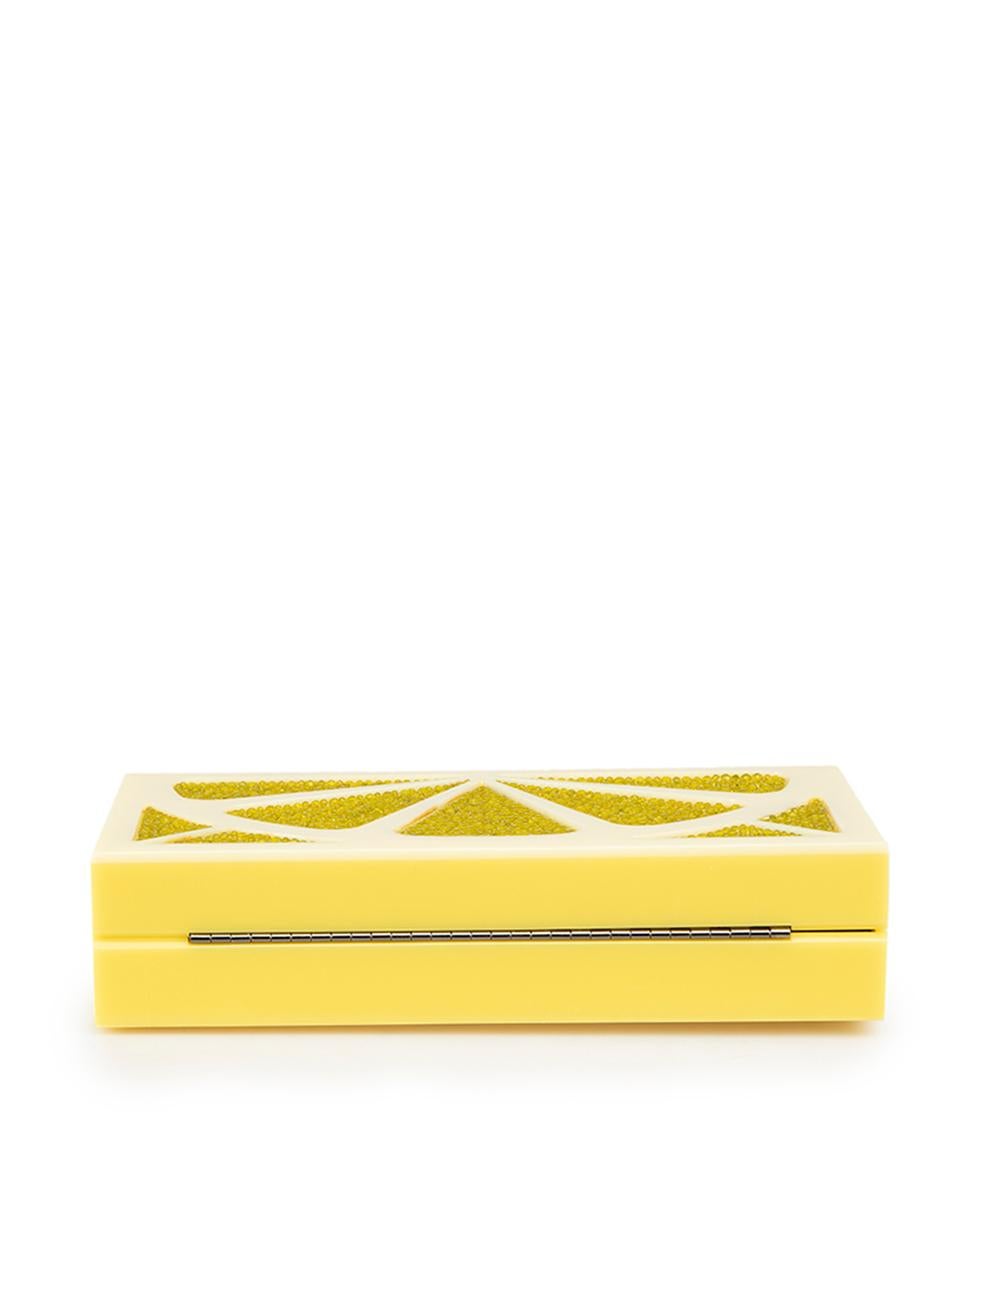 Women's Alice + Olivia Yellow Perspex Cindy Lemon Clutch For Sale